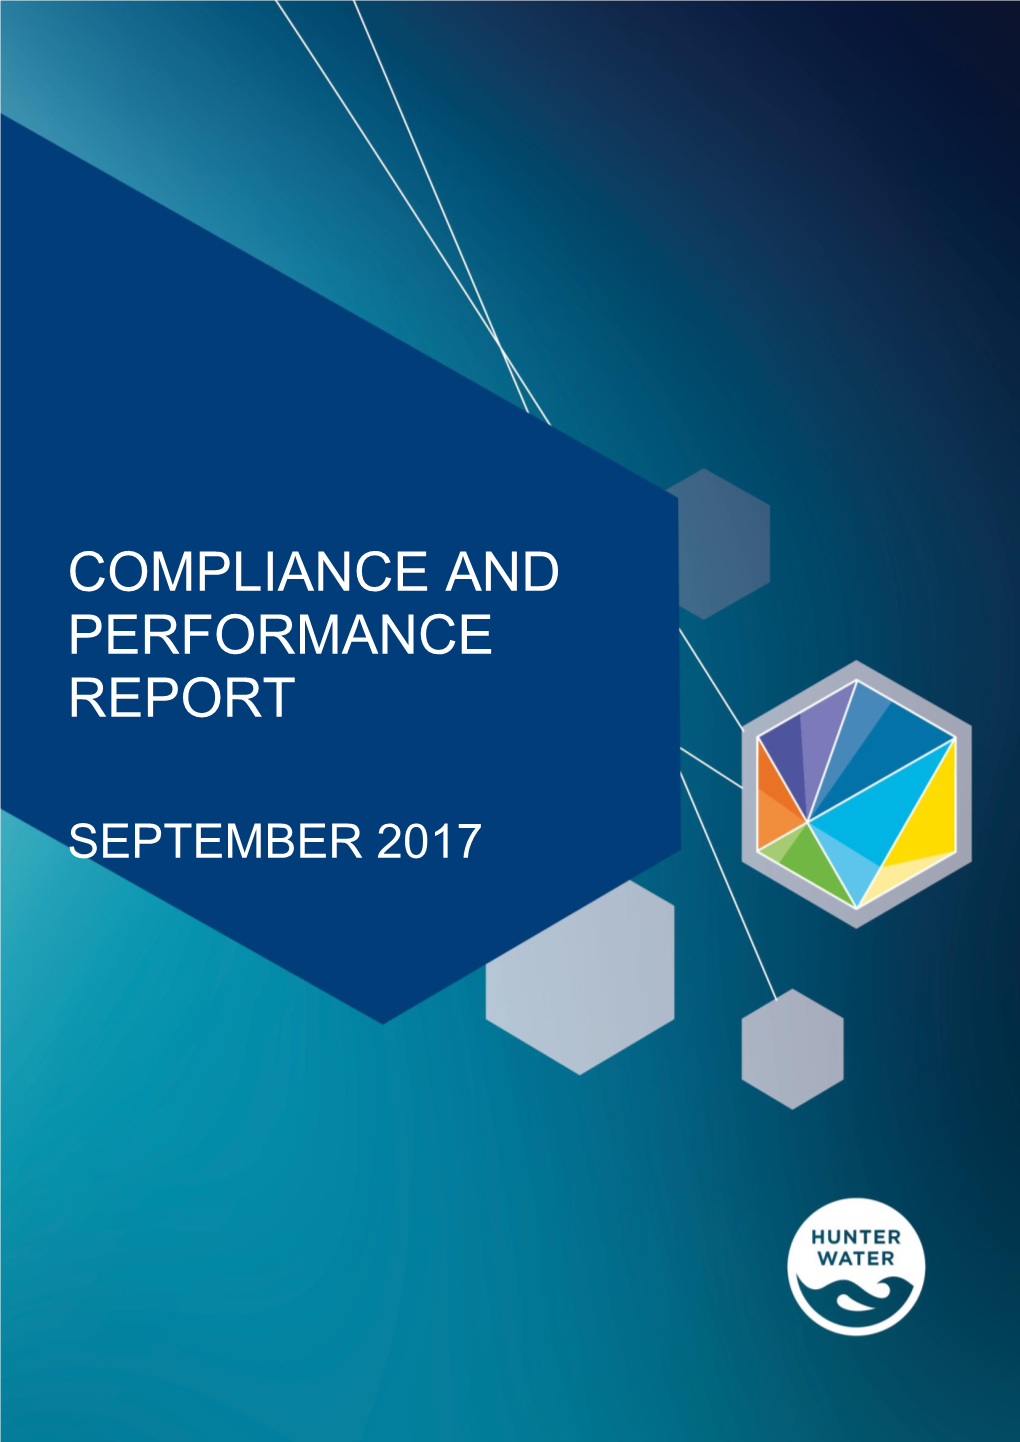 Hunter Water Compliance and Performance Report 2016-17